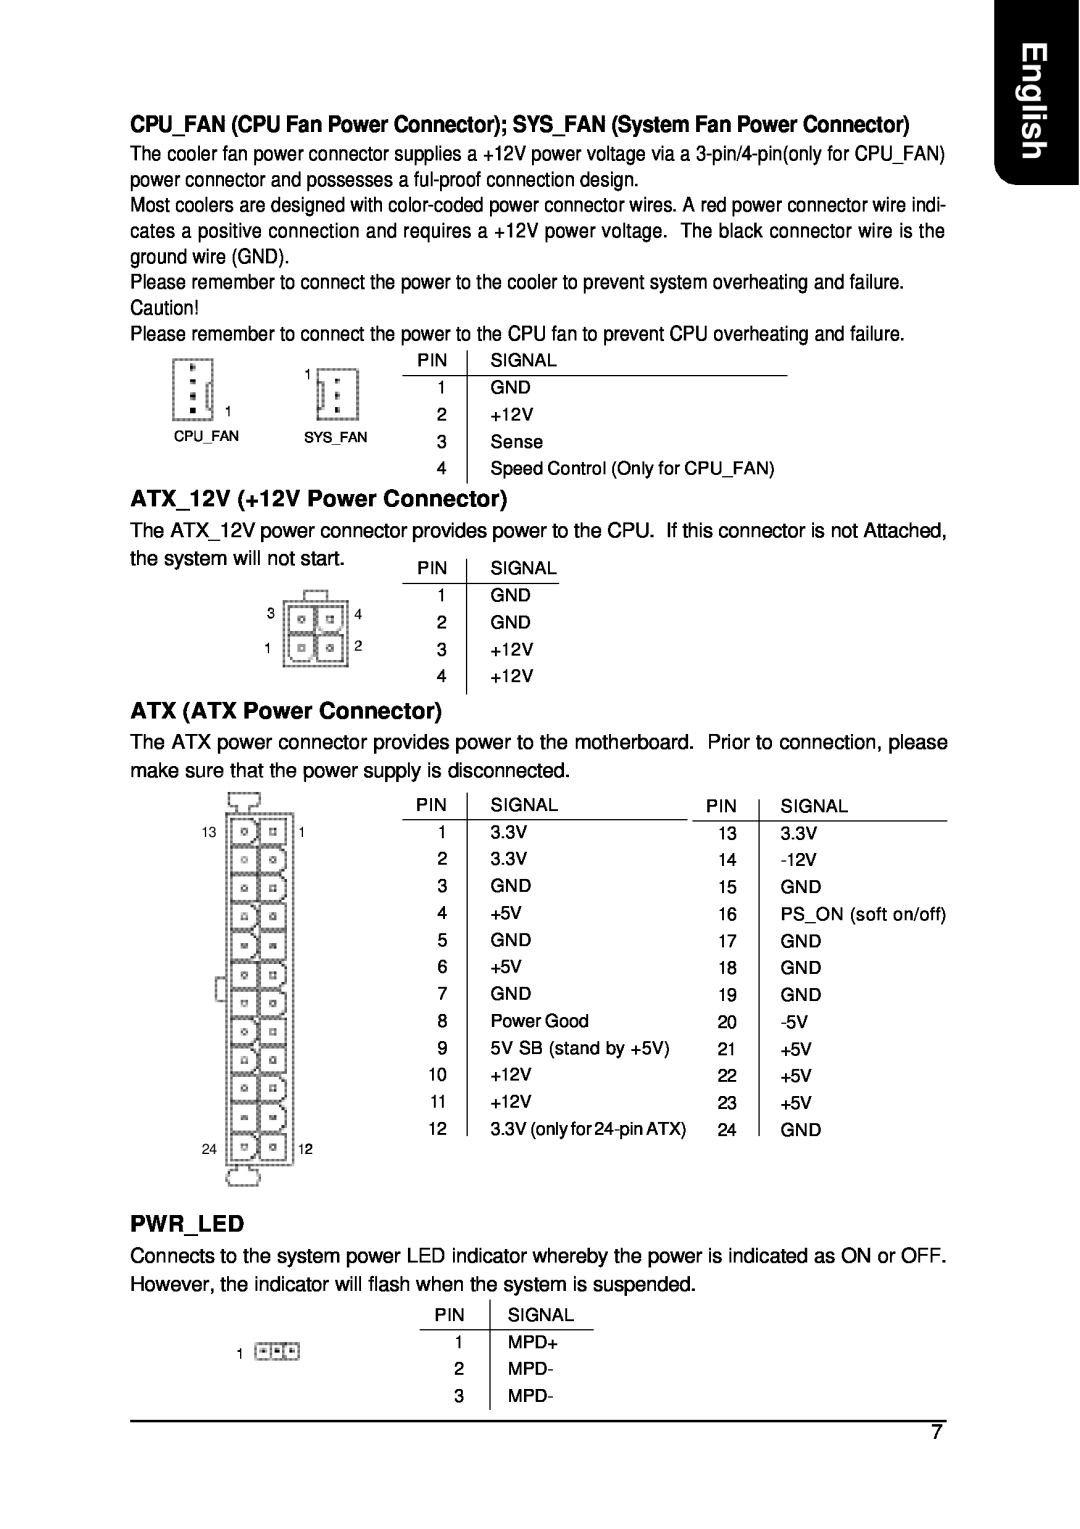 Intel XP-P5CM-GL, XP-P5CM-GV user manual ATX 12V +12V Power Connector, ATX ATX Power Connector, Pwr Led, English 